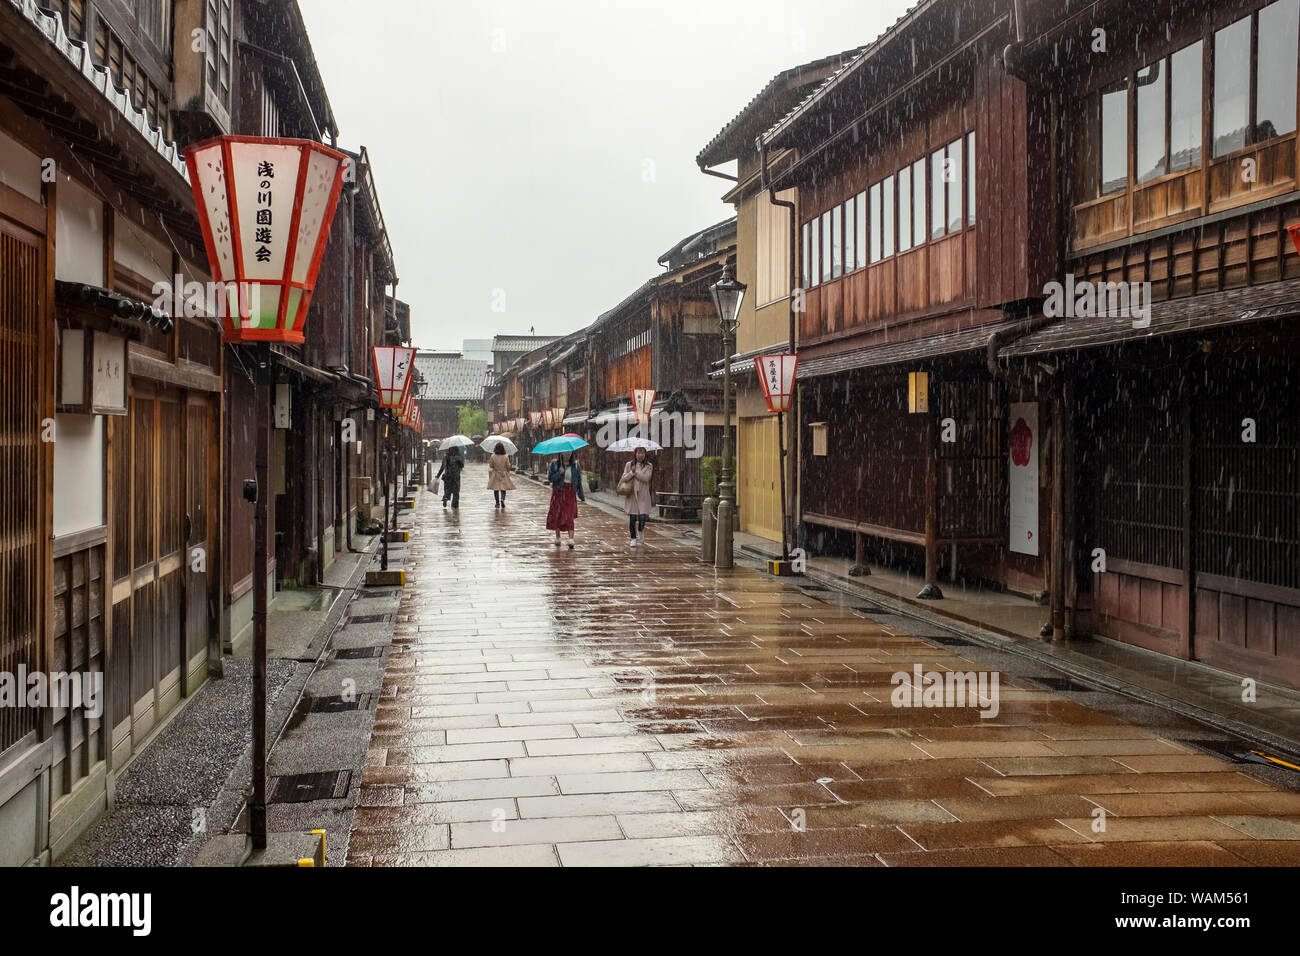 Tourists walking with umbrellas in the rain past traditional teahouses and buildings in the Higashi Chaya geisha district, Kanazawa, Japan Stock Photo